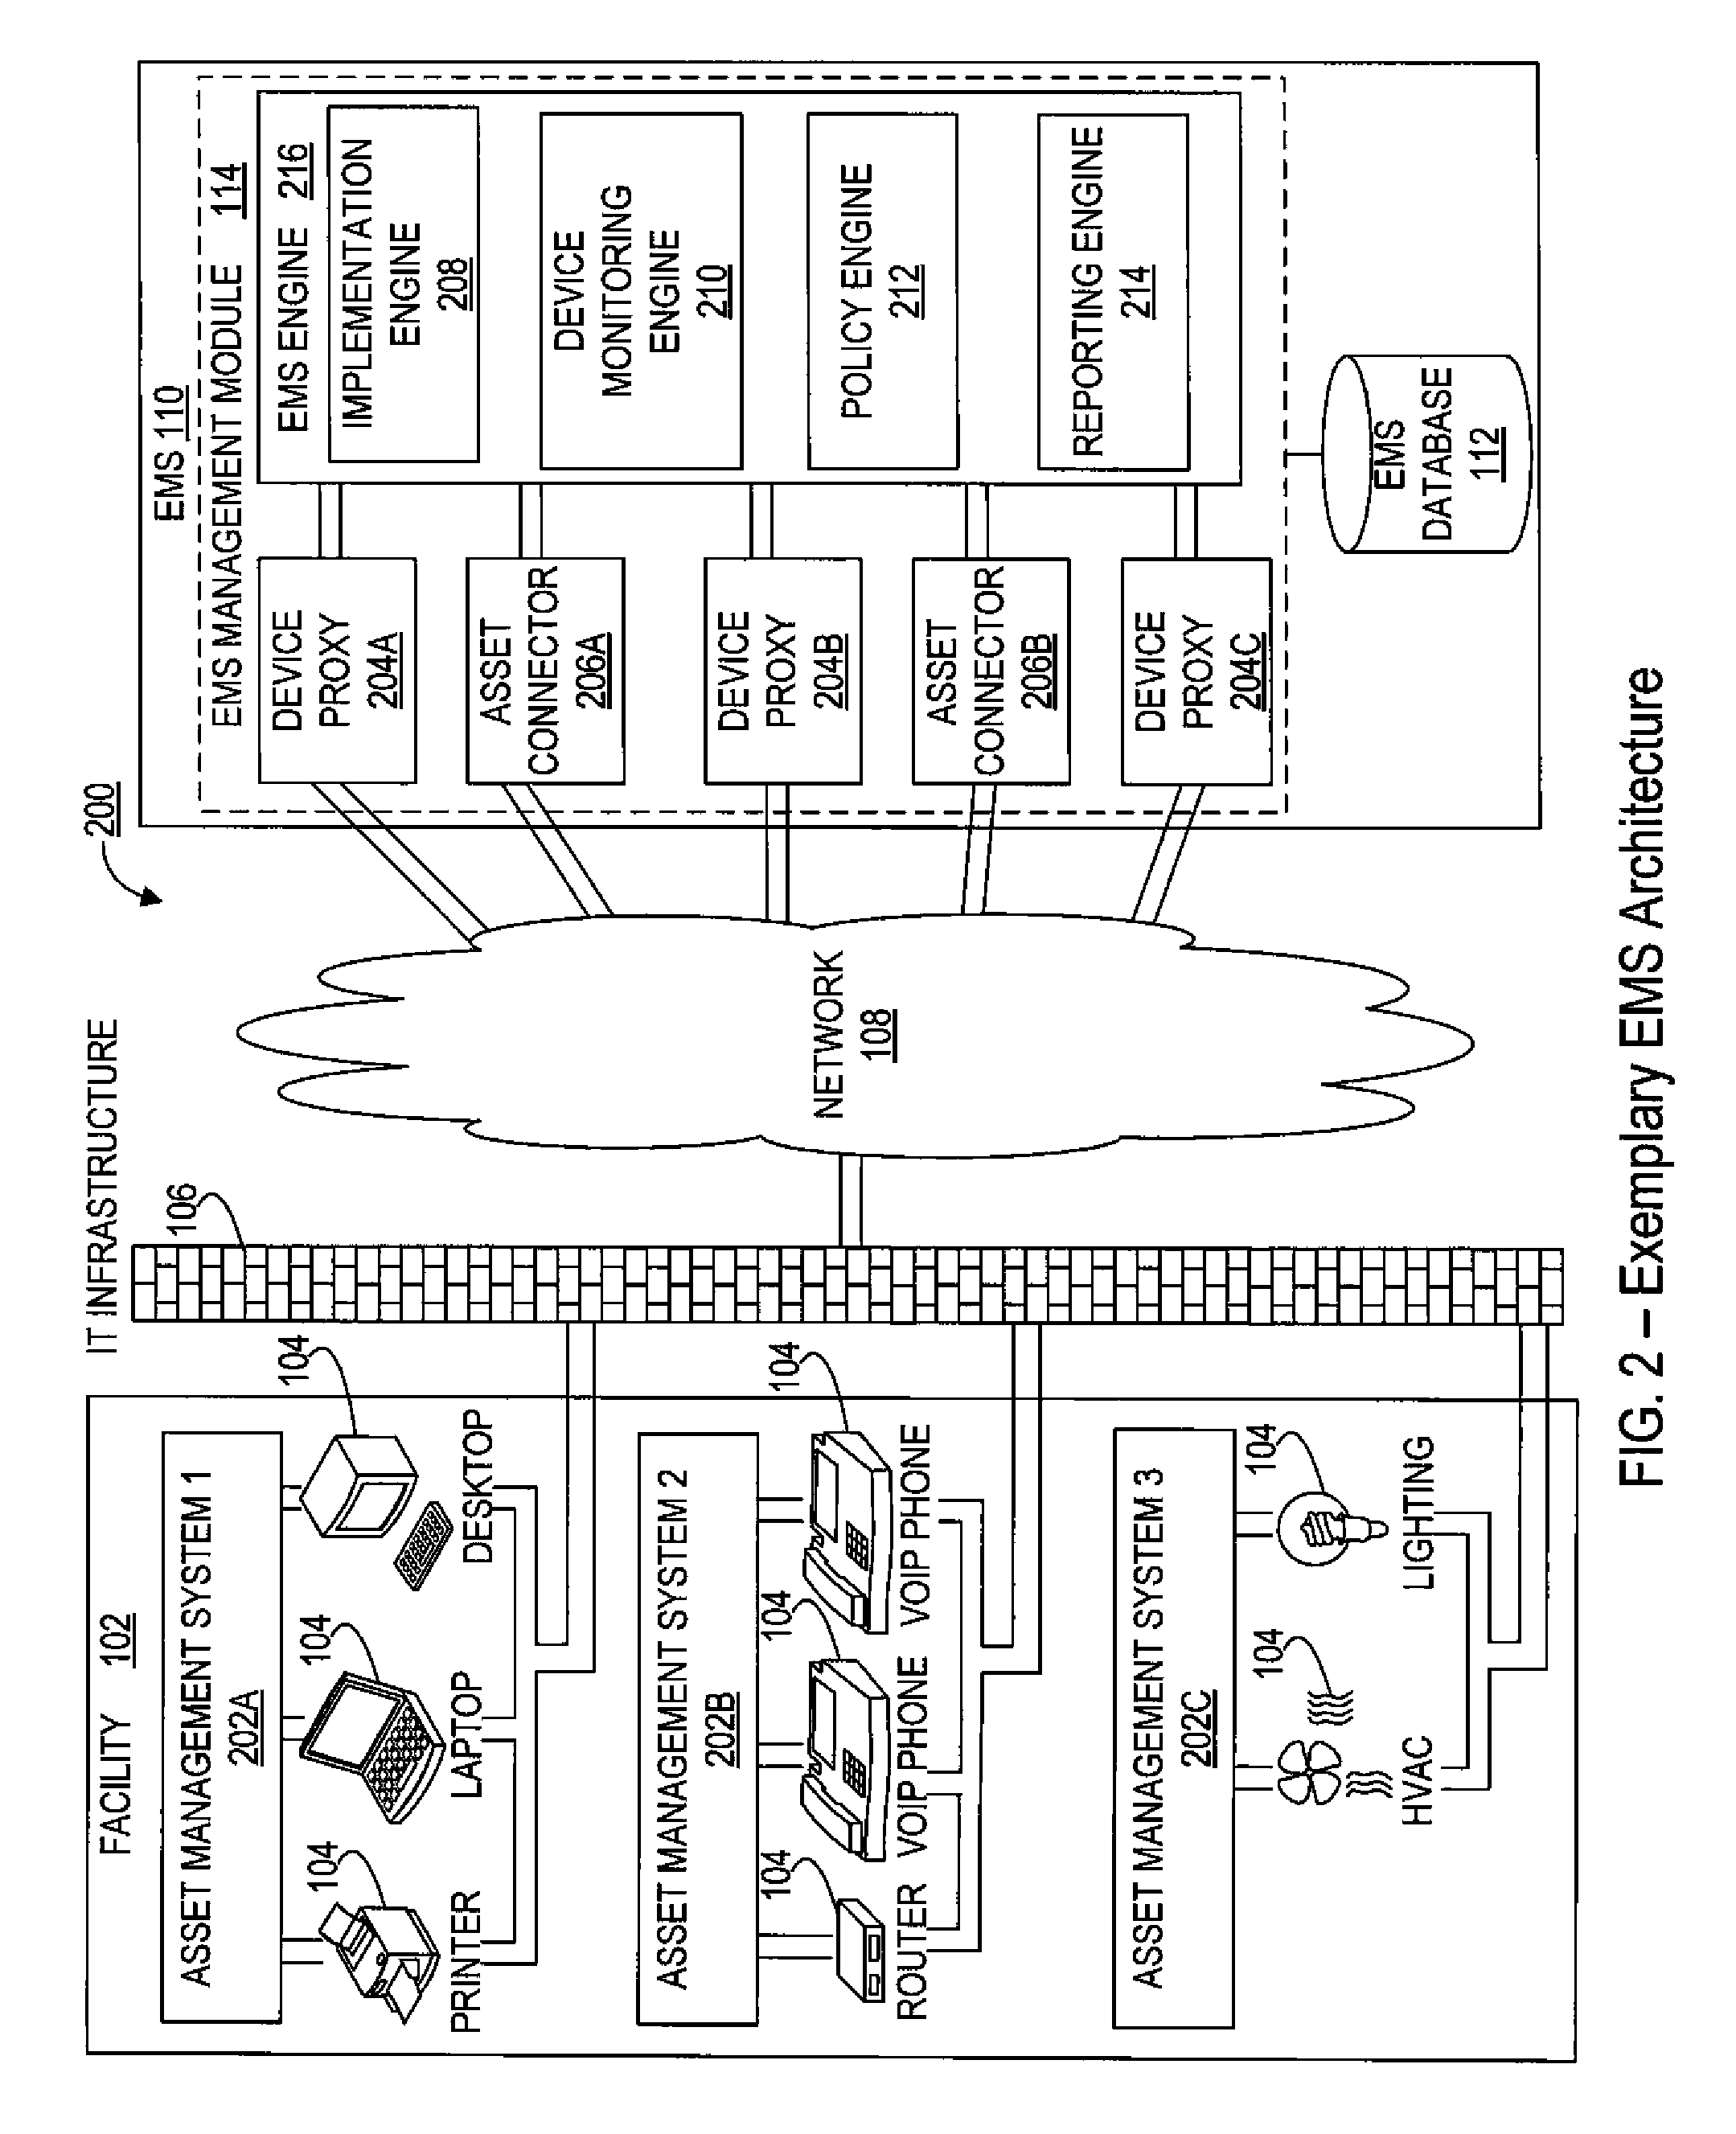 System and methods for sustainable energy management, monitoring, and control of electronic devices